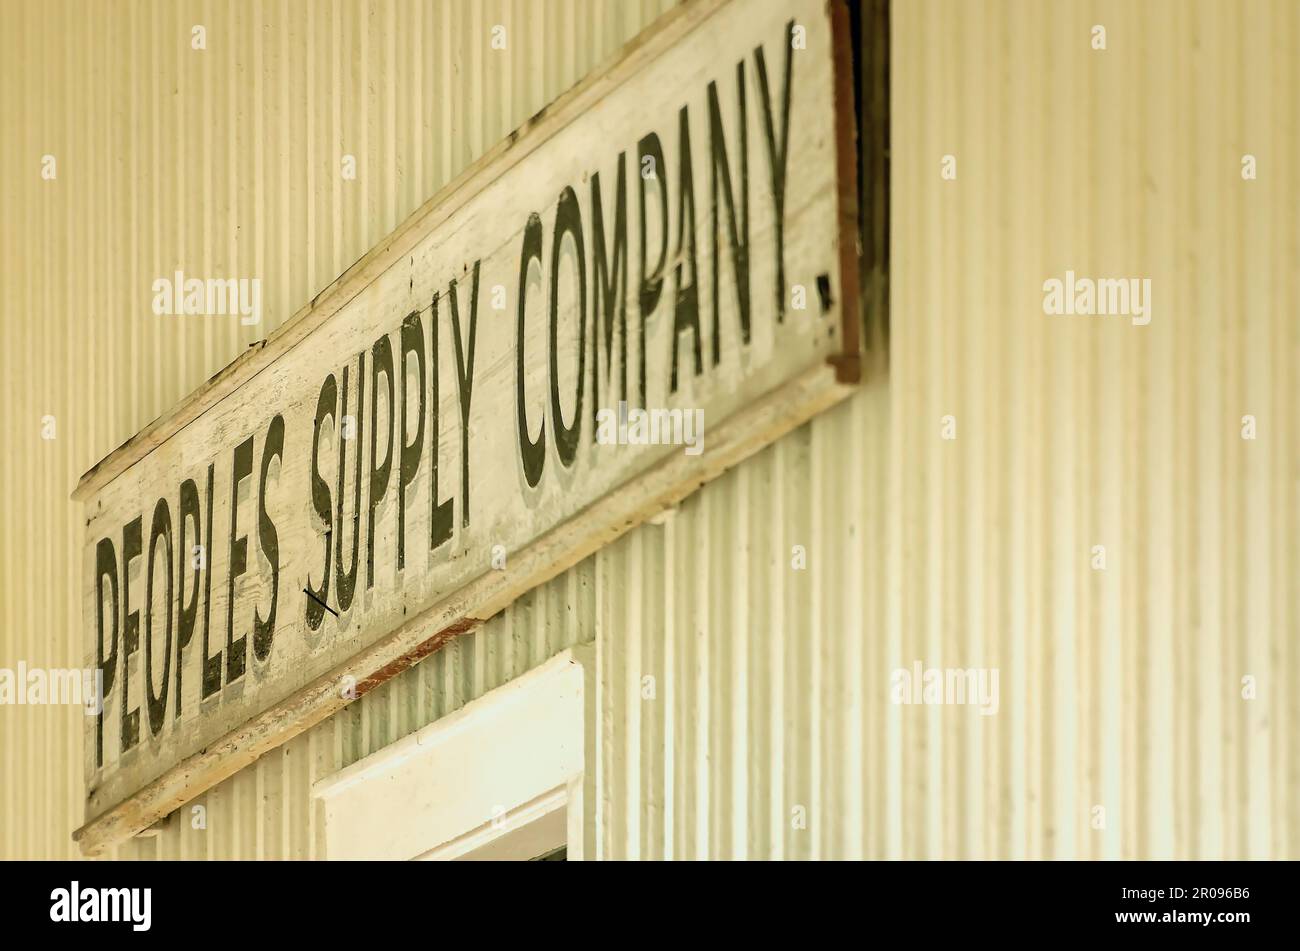 Peoples Supply Company is pictured, April 30, 2023, in Silverhill, Alabama. The historic general store was built in 1902. Stock Photo